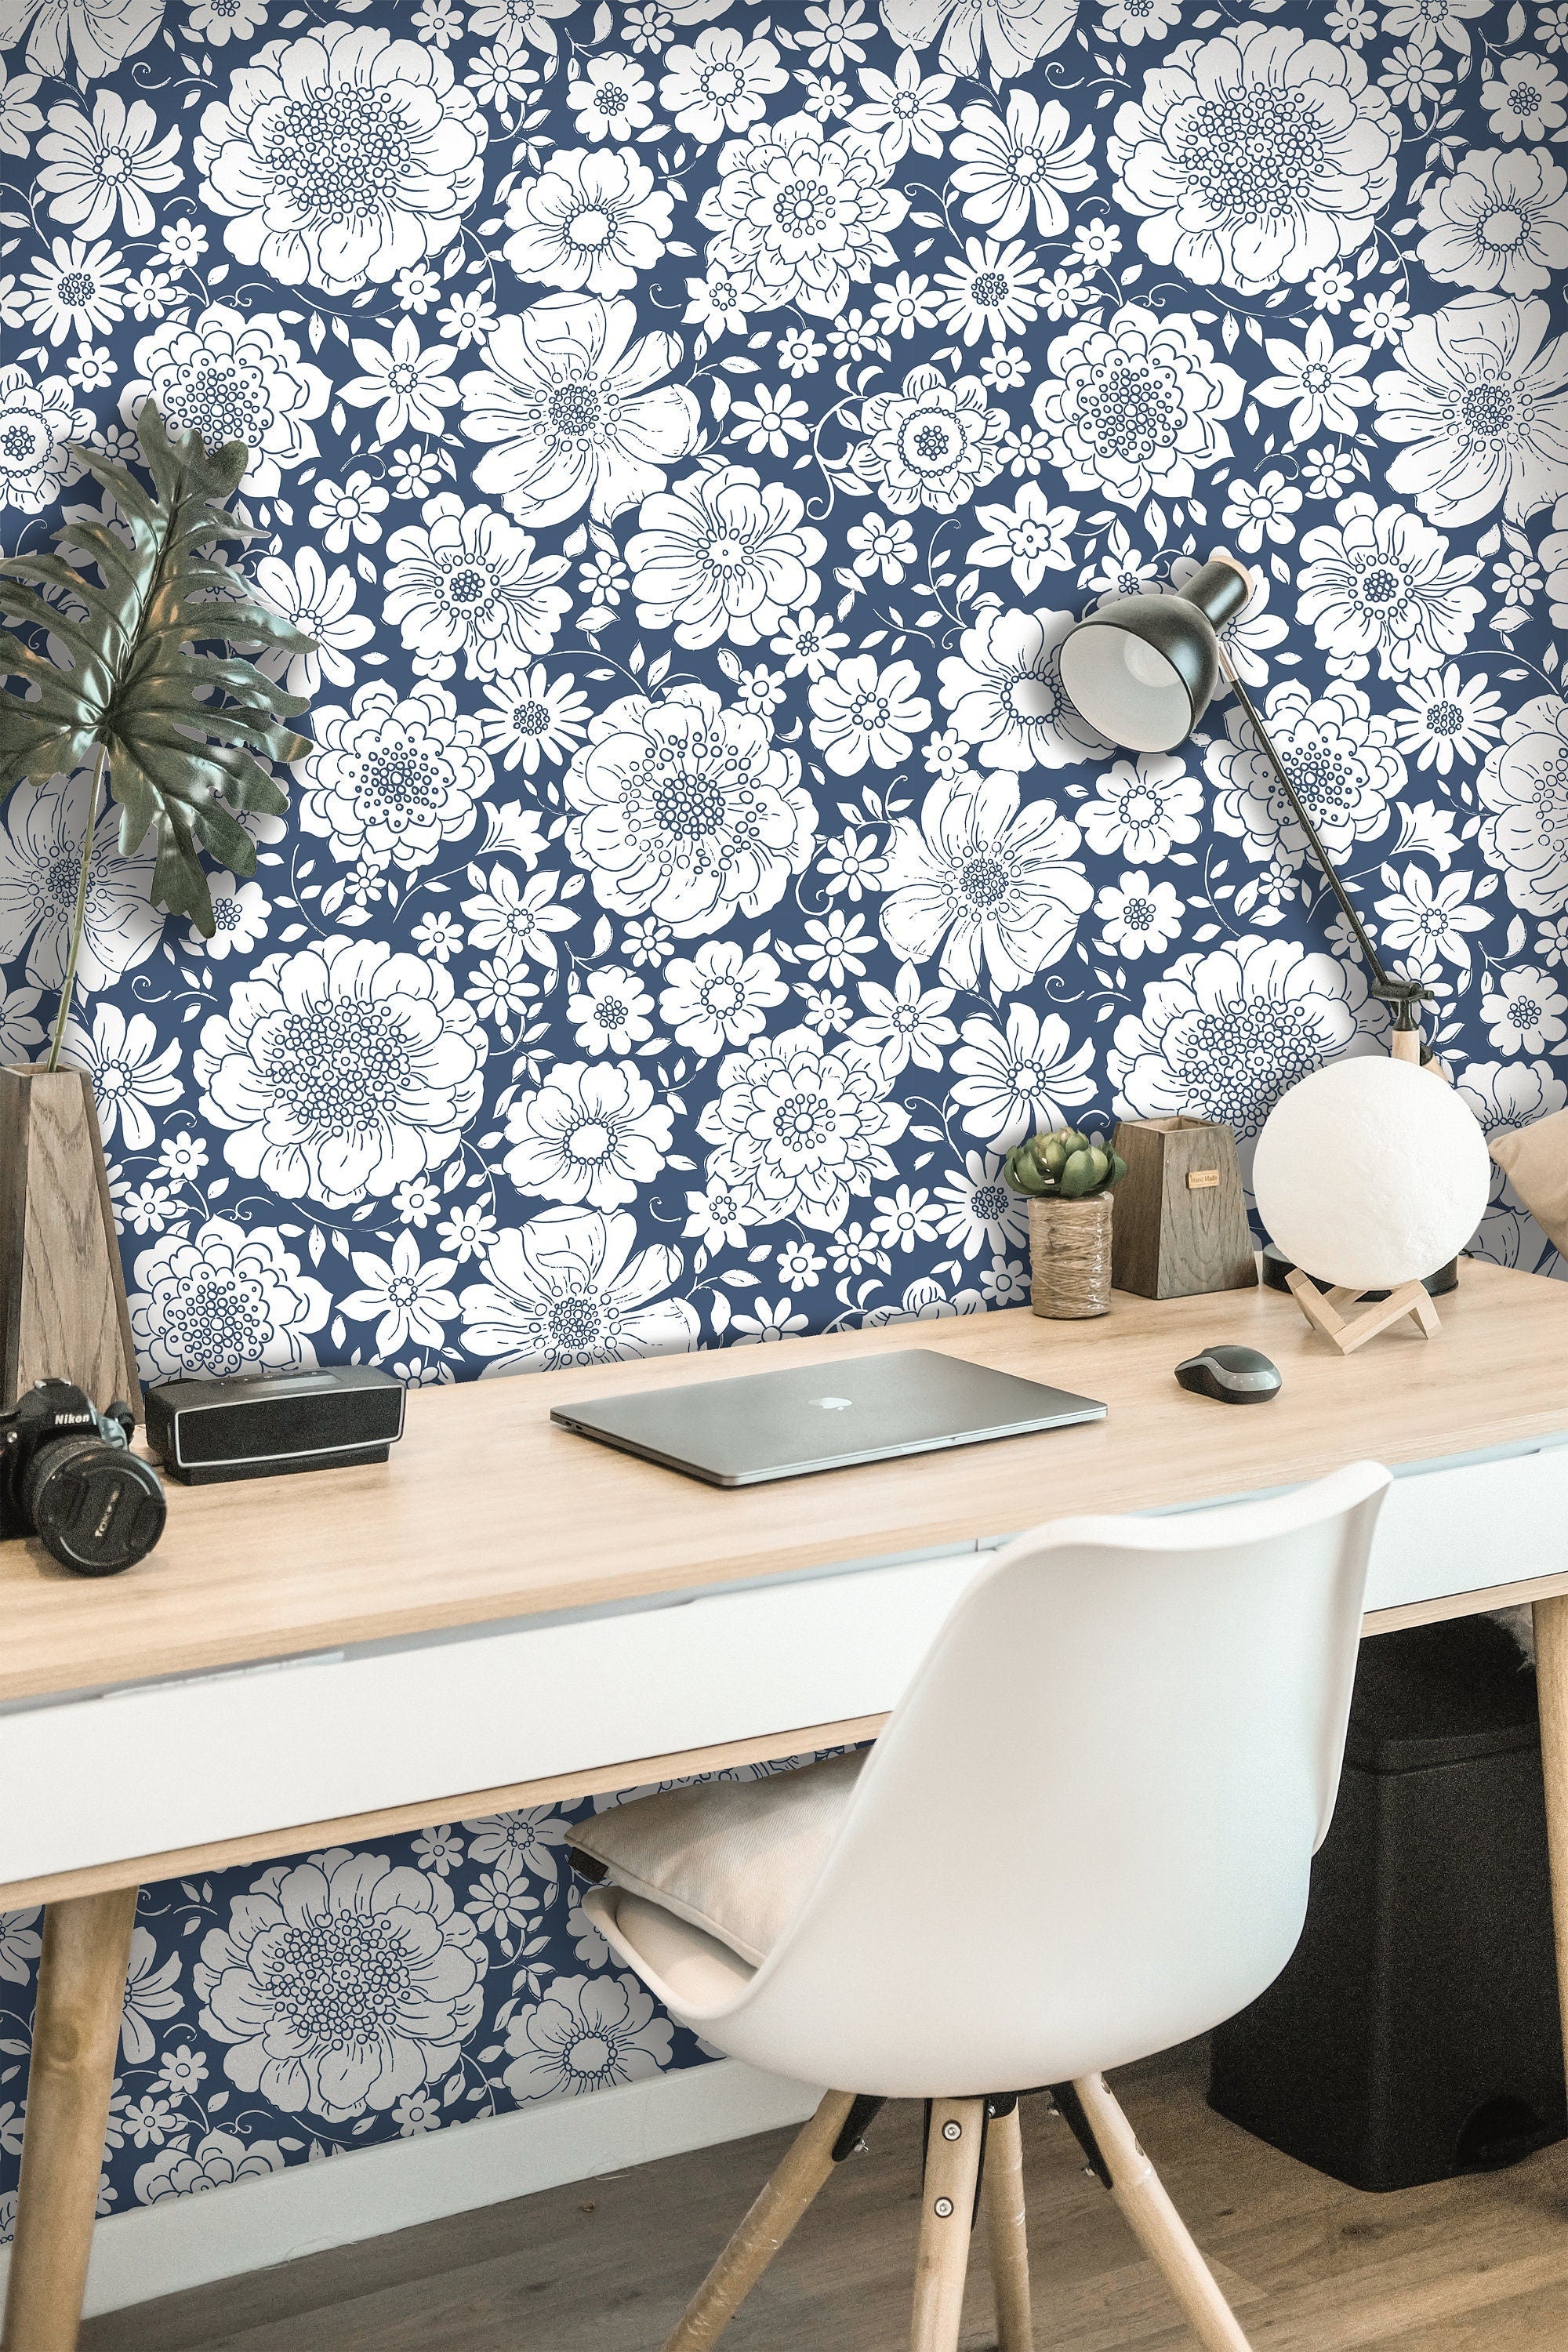 Wallpaper Peel and Stick Wallpaper Blue and White Stamped Floral Removable Wallpaper Wall Decor Home Decor Wall Art Room Decor 3744 - JamesAndColors